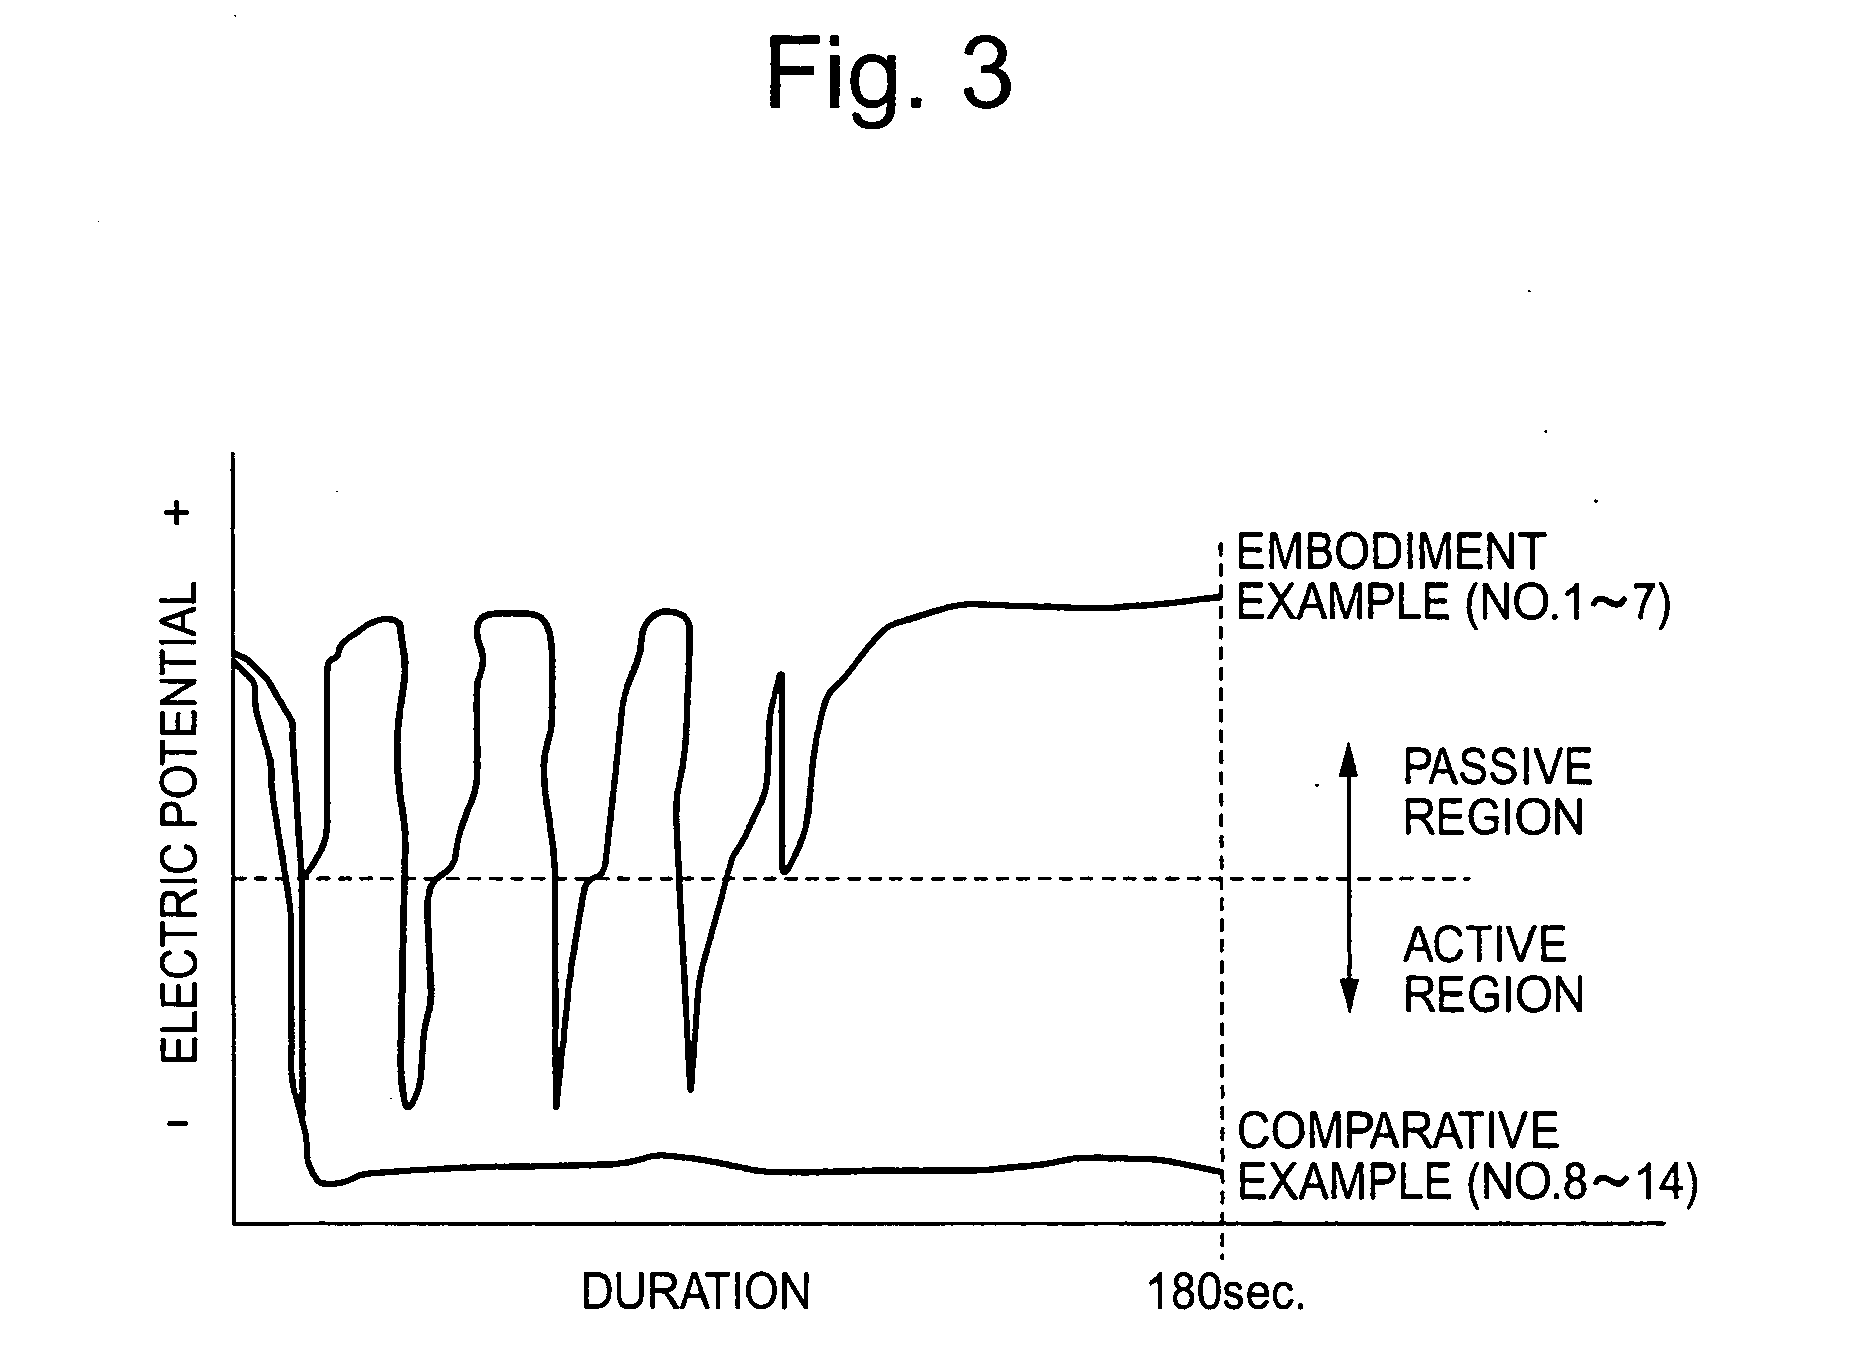 Method of surface-finishing stainless steel after descaling